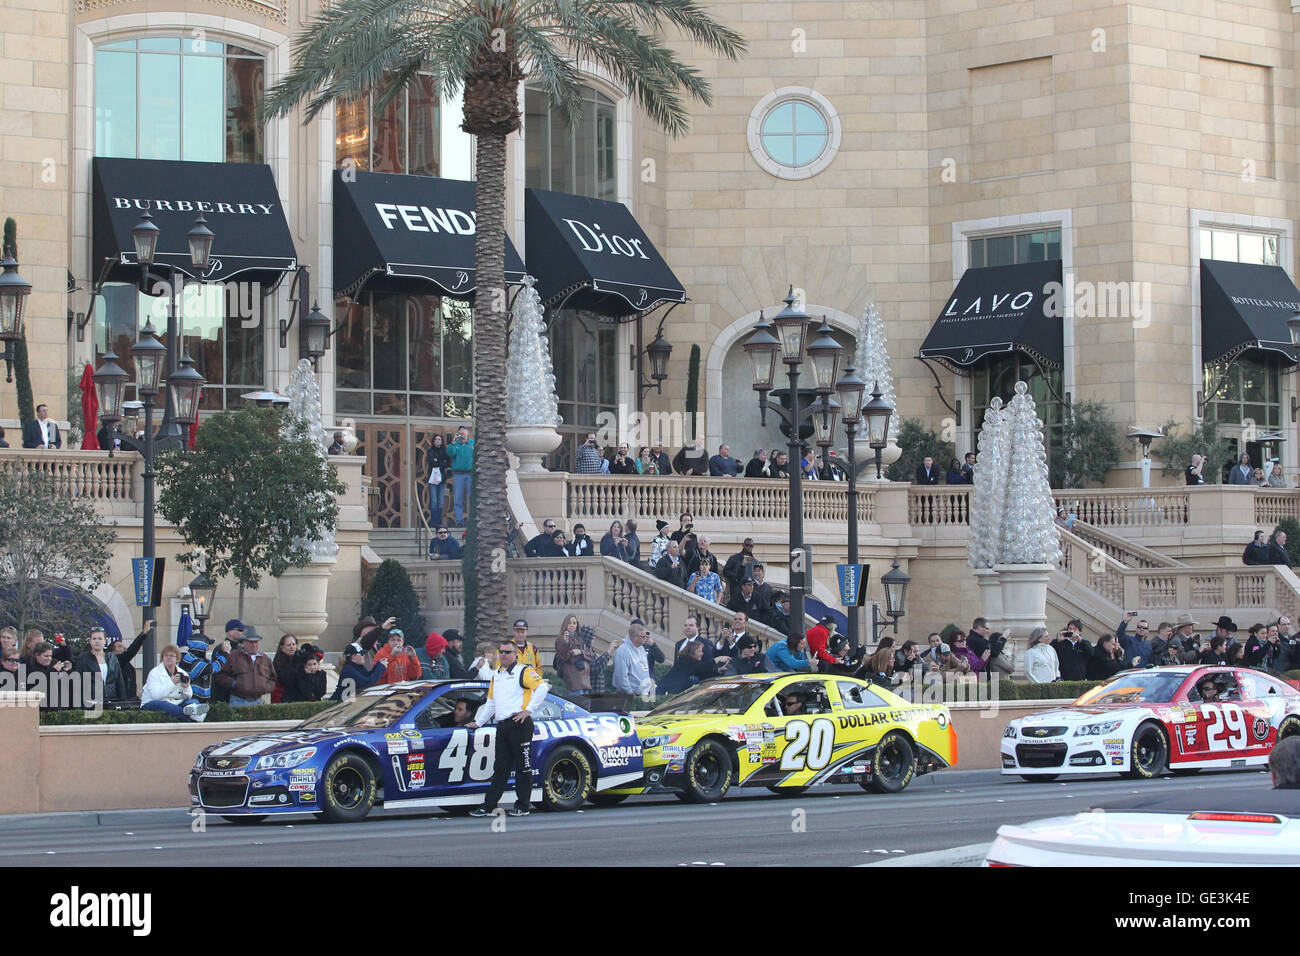 LAS VEGAS, NV - DECEMBER 5: Jimmie Johnson, Matt Kenseth and Kevin Harvick pictured in their racecars during the NASCAR Victory Lap fan experience featuring celebratory burnouts and drivers performing donuts on Las Vegas Blvd in Las Vegas, Nevada during NASCAR Champion's Week on December 5, 2013. Credit: mpi34/MediaPunch Inc. Stock Photo